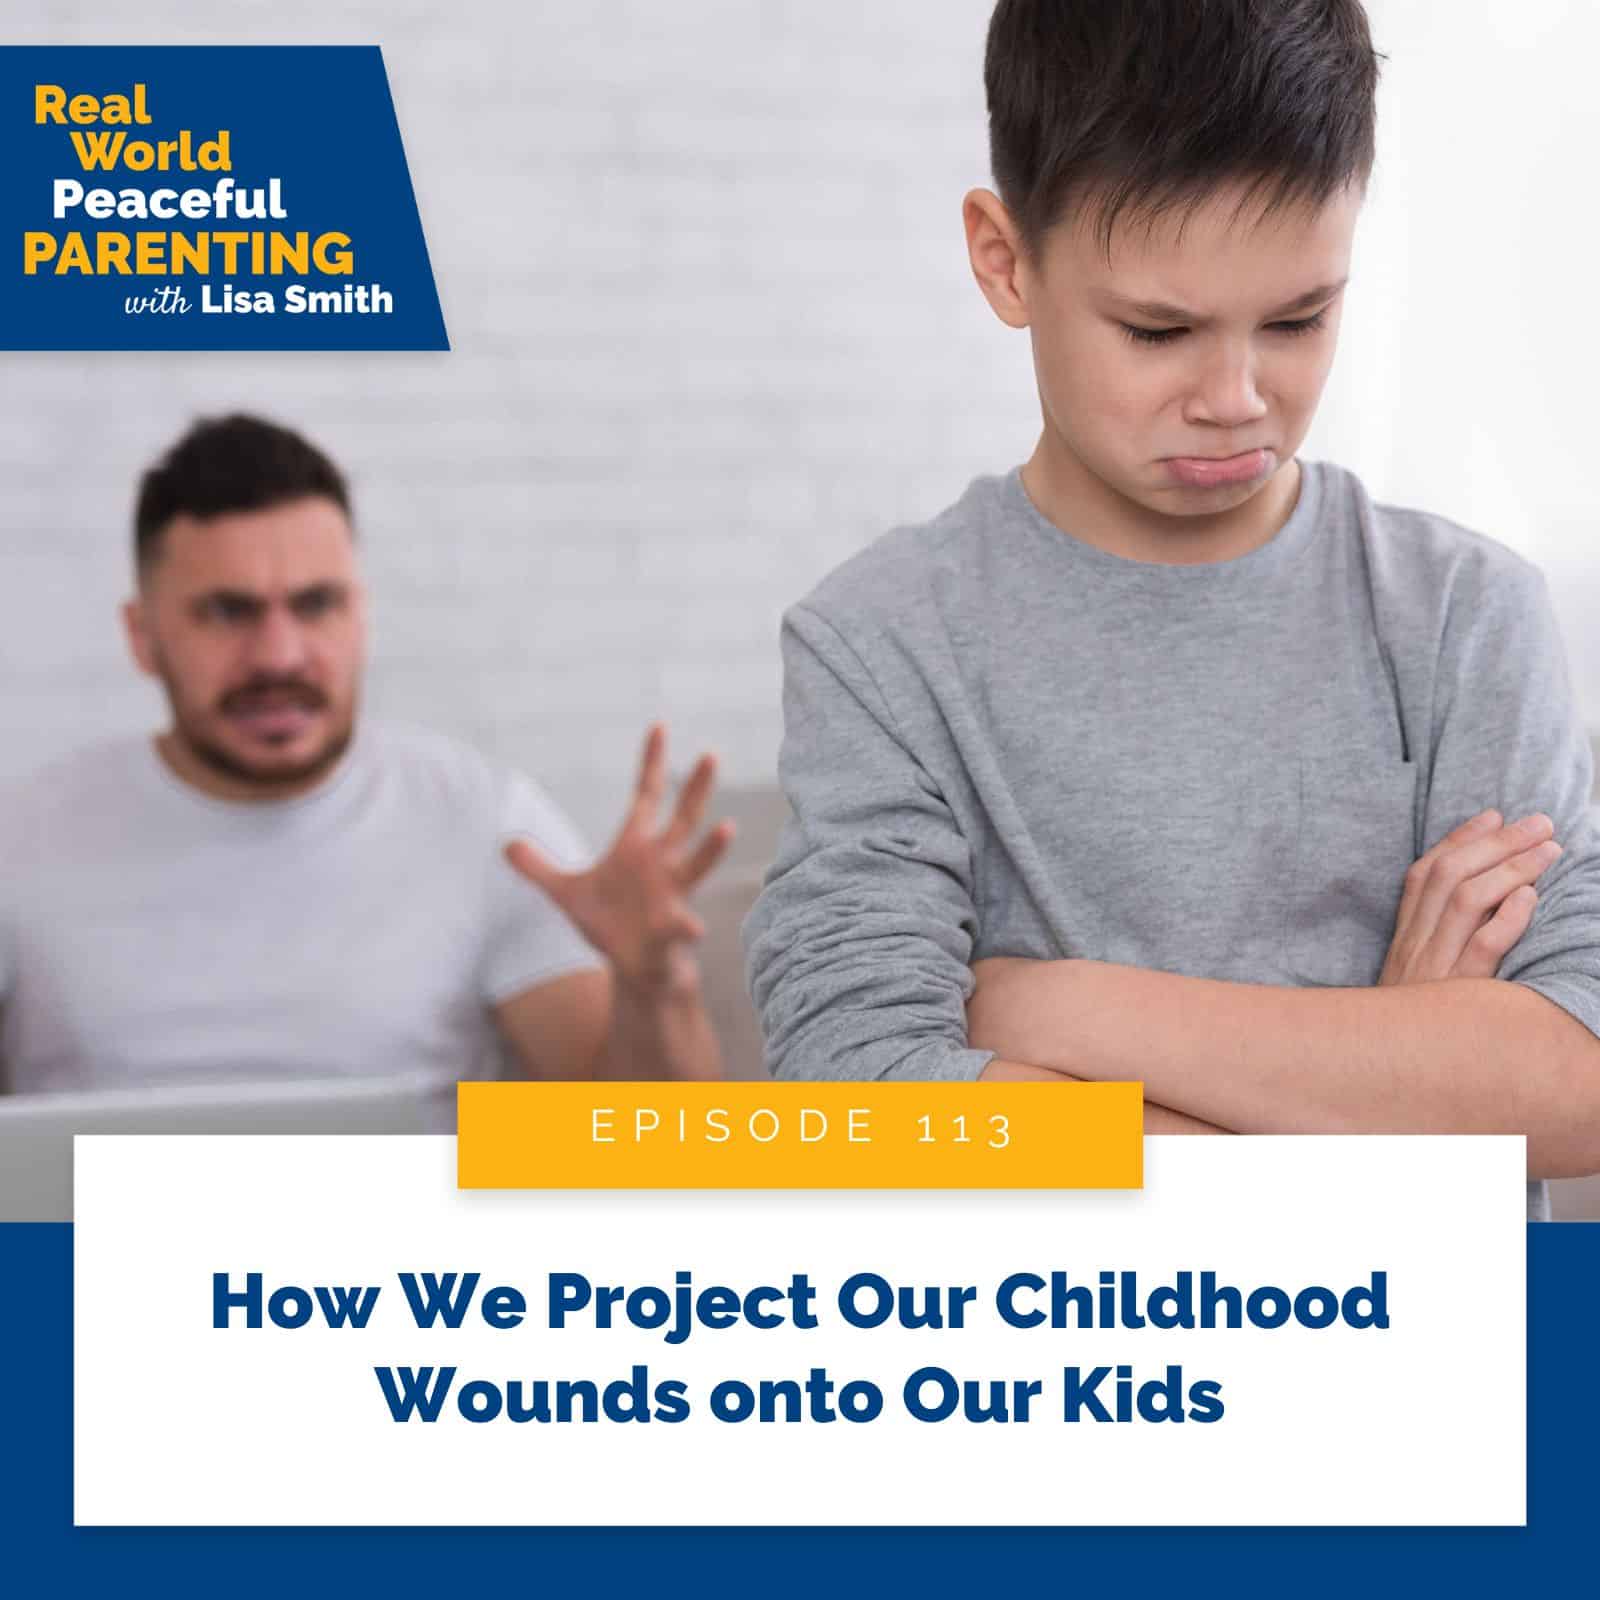 Real World Peaceful Parenting Lisa Smith | How We Project Our Childhood Wounds onto Our Kids